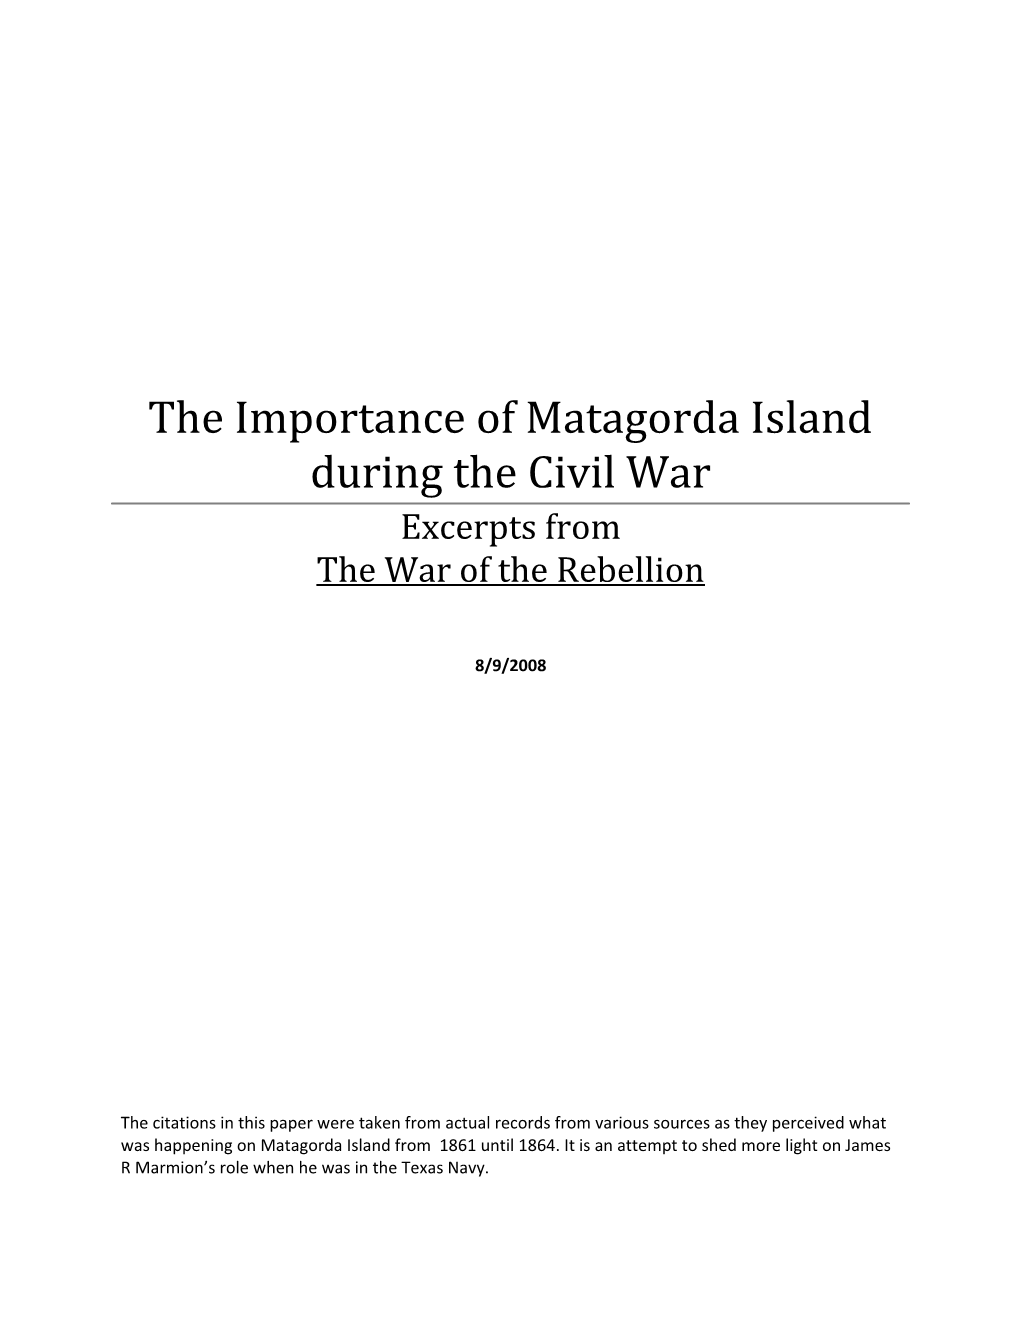 The Importance of Matagorda During the Civil War